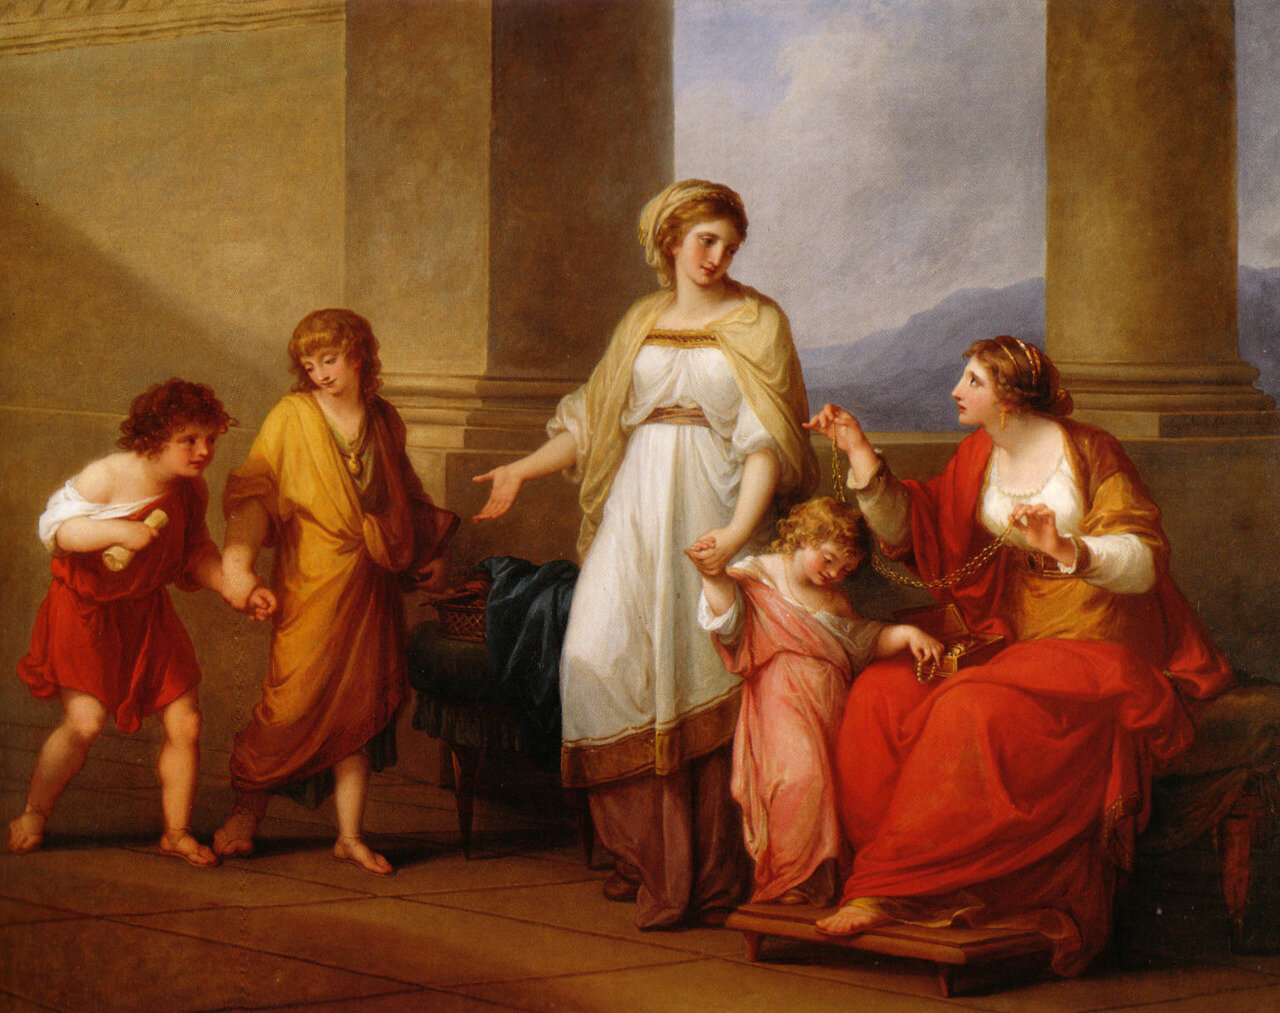 Angelica Kauffman, Cornelia, Mother of the Gracchi, Pointing to Her Children as Her Treasures, c. 1785